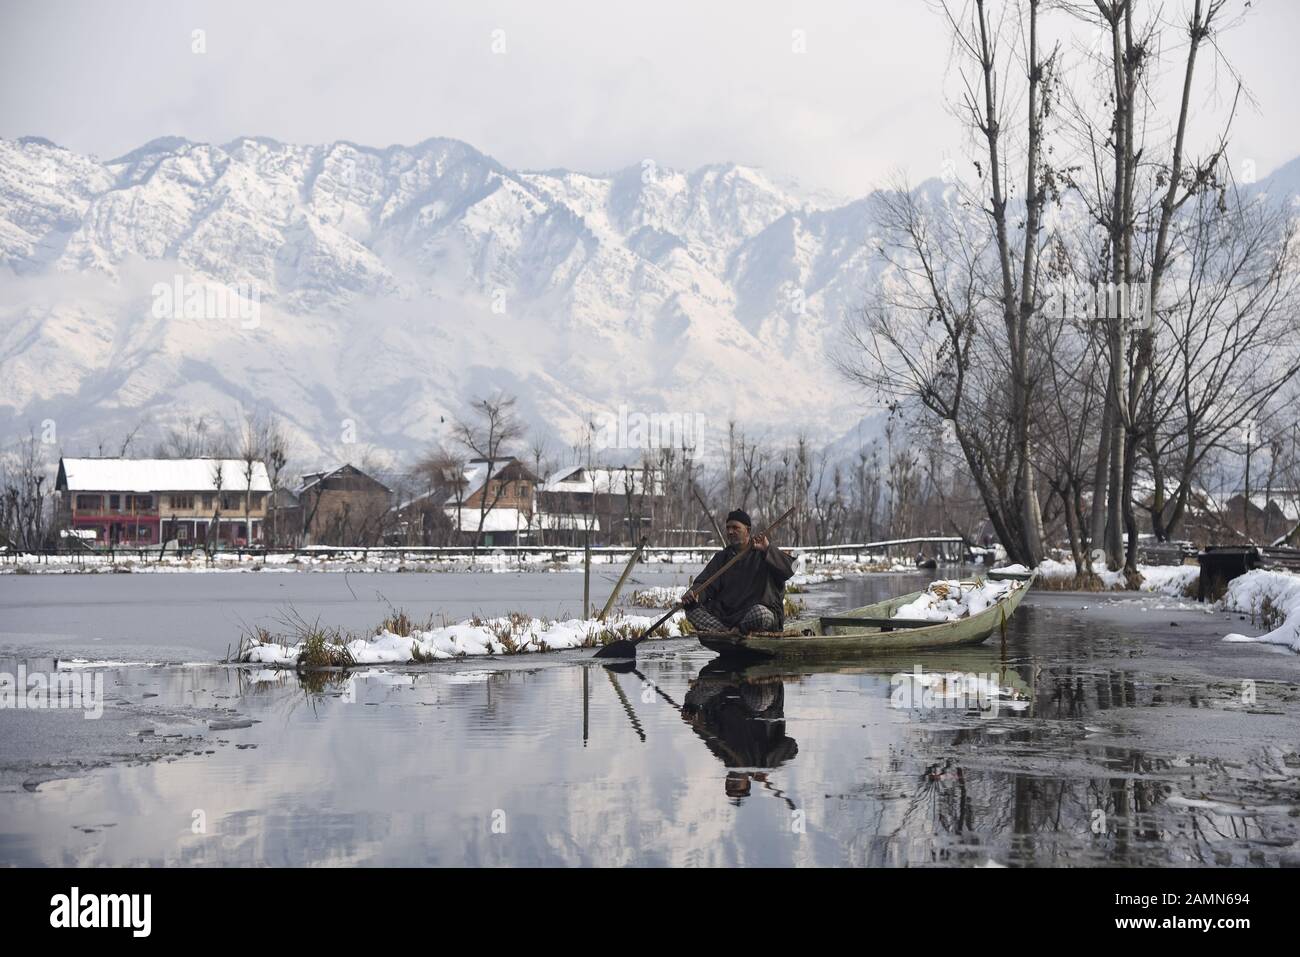 A Kashmiri boatman rows his boat on Dal Lake after fresh snowfall in Srinagar.Due to heavy snowfall in the last 48 hours, there have been multiple avalanches in which at least 4 Indian army soldiers and 5 civilians Killed in the Indian administered Kashmir. Stock Photo